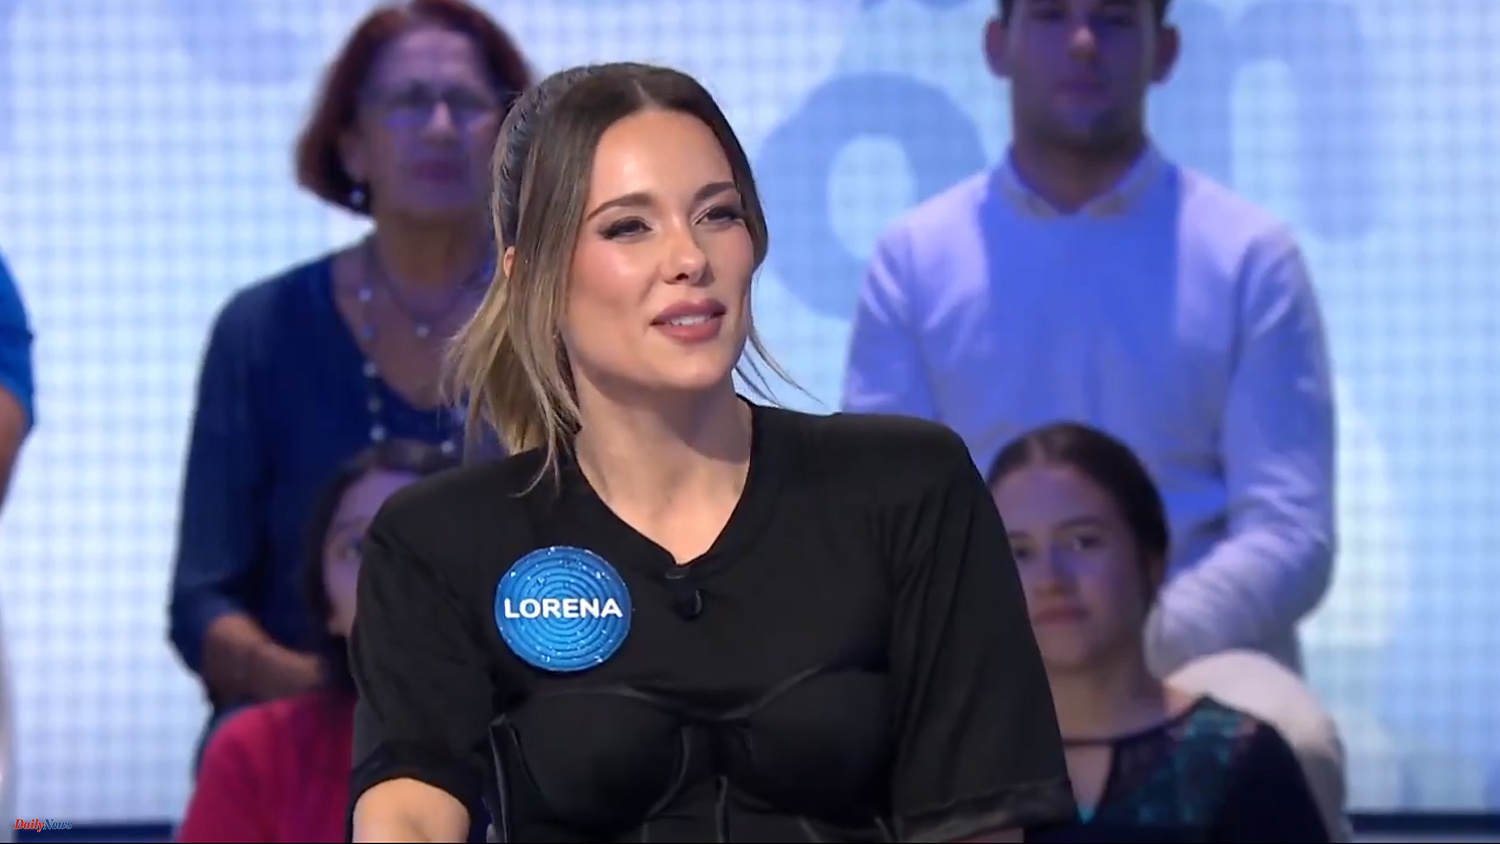 Television Who is Lorena Gómez, the new guest of Pasapalabra